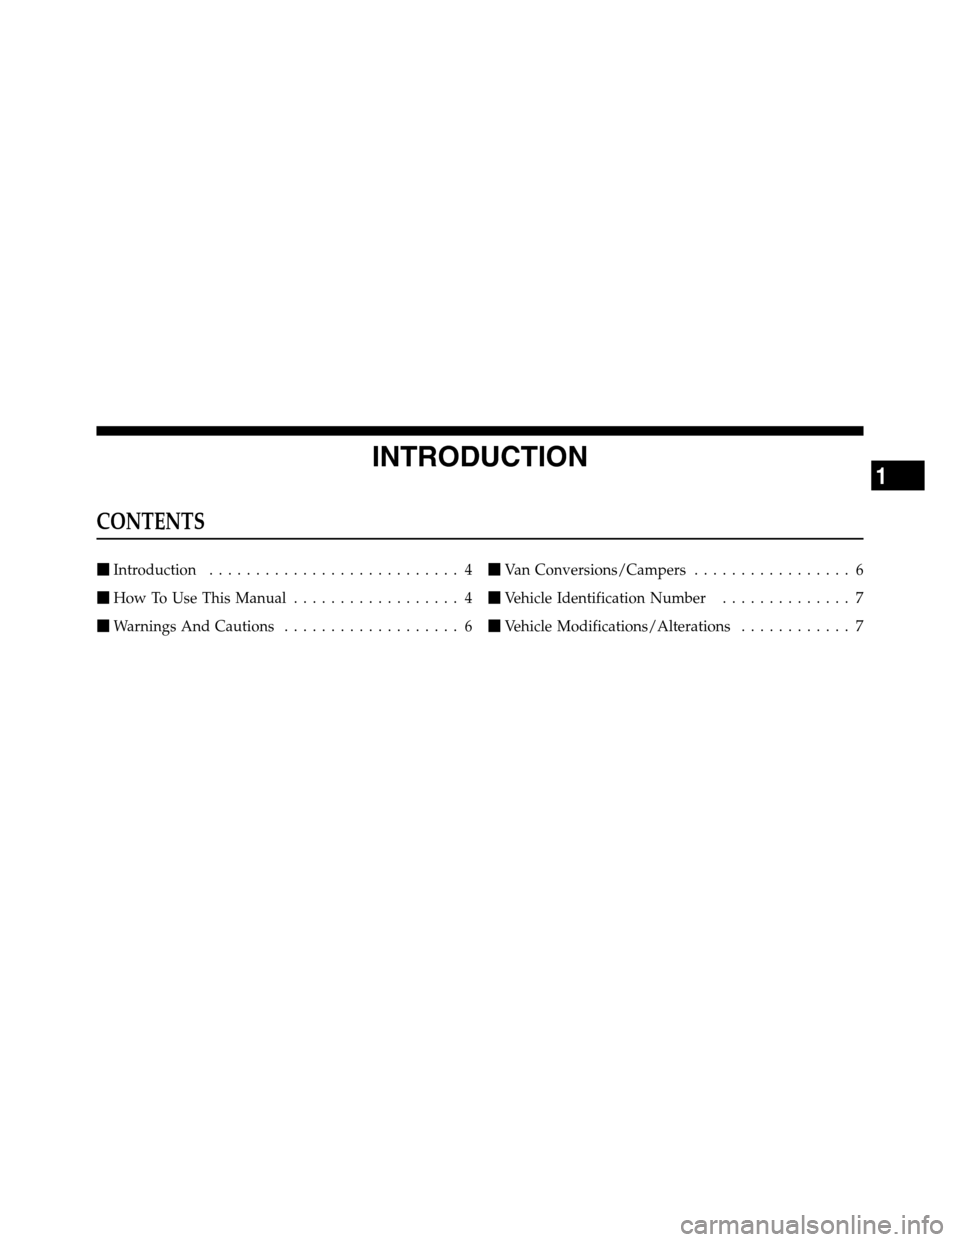 Ram 3500 2011  Owners Manual INTRODUCTION
CONTENTS
Introduction........................... 4
How To Use This Manual.................. 4
Warnings And Cautions................... 6Van Conversions/Campers................. 6
Veh